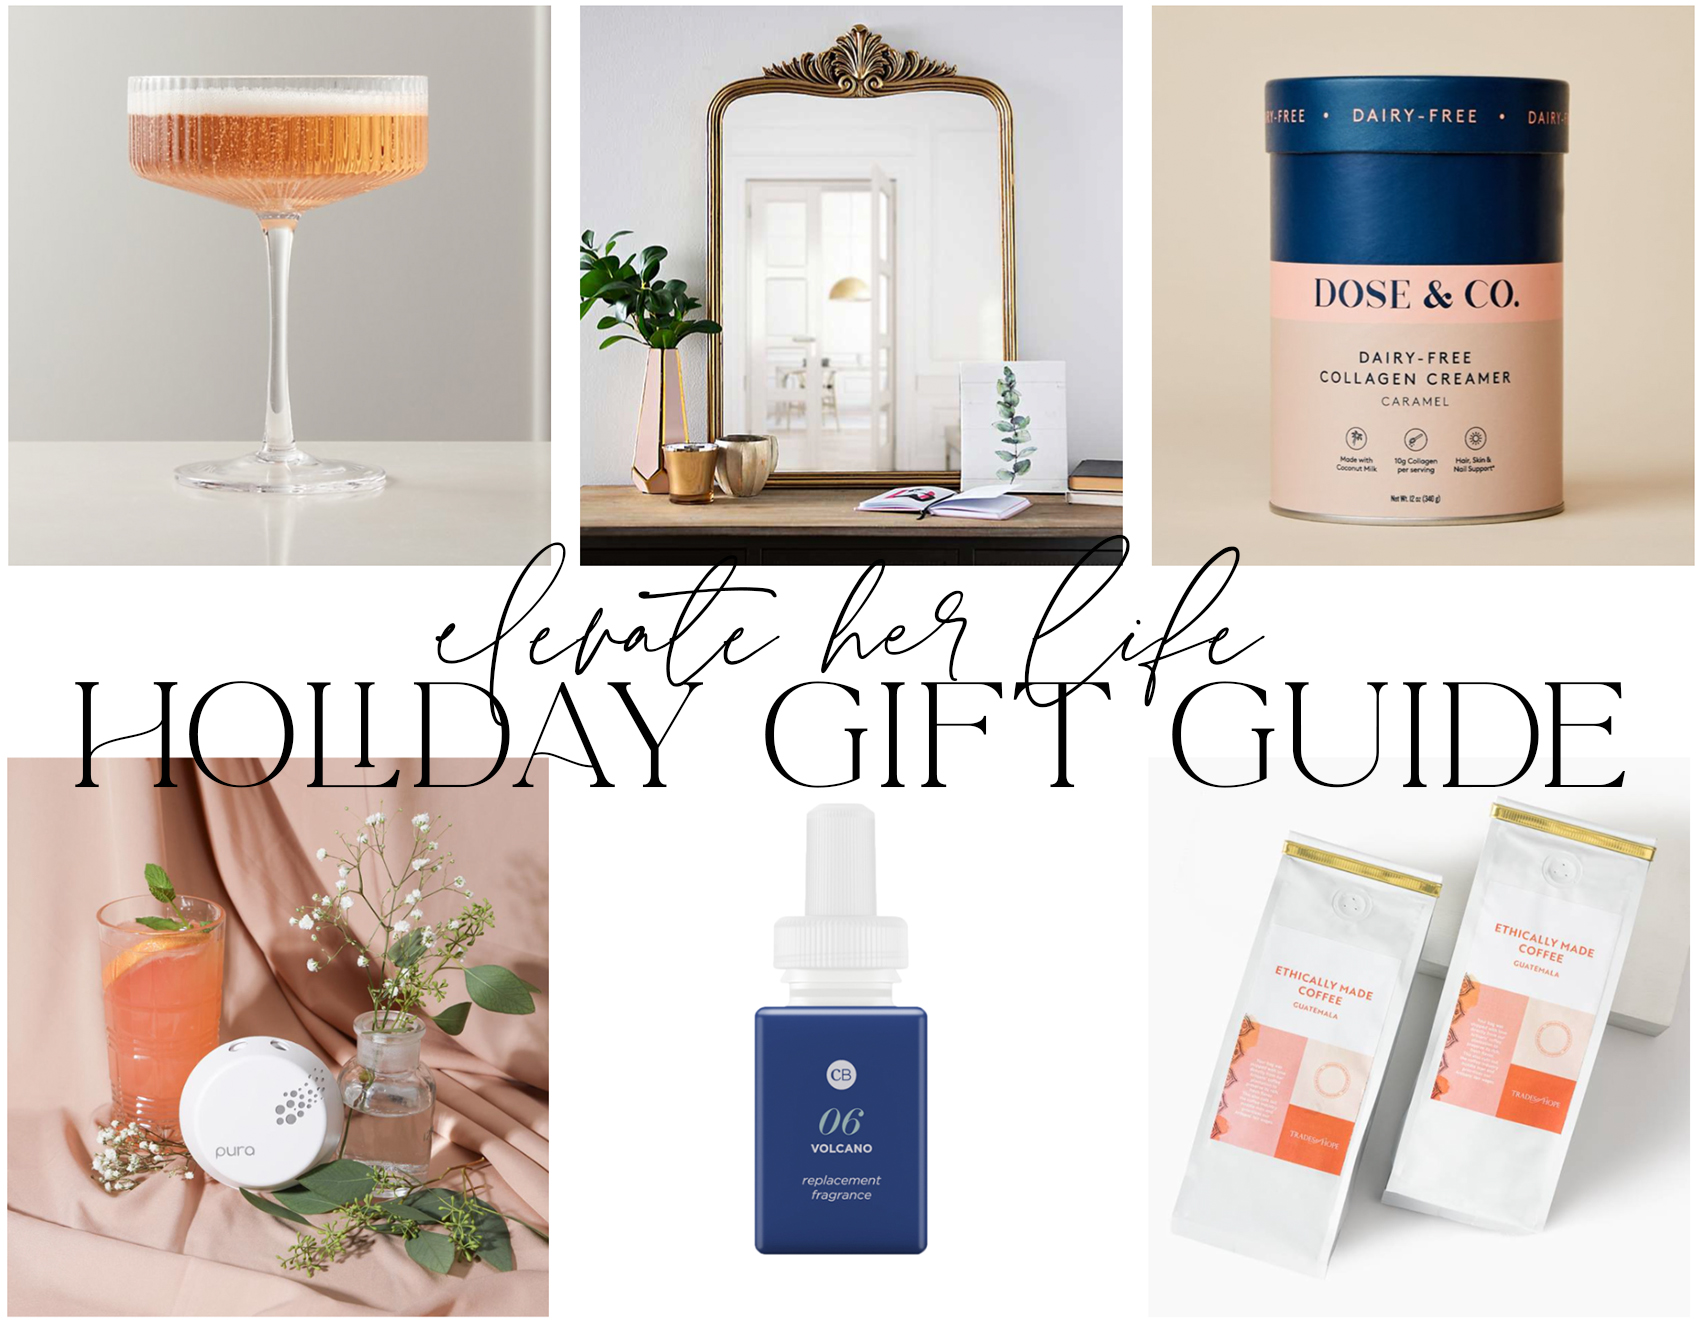 2020 holiday gift ideas guide elevate her life elisabeth